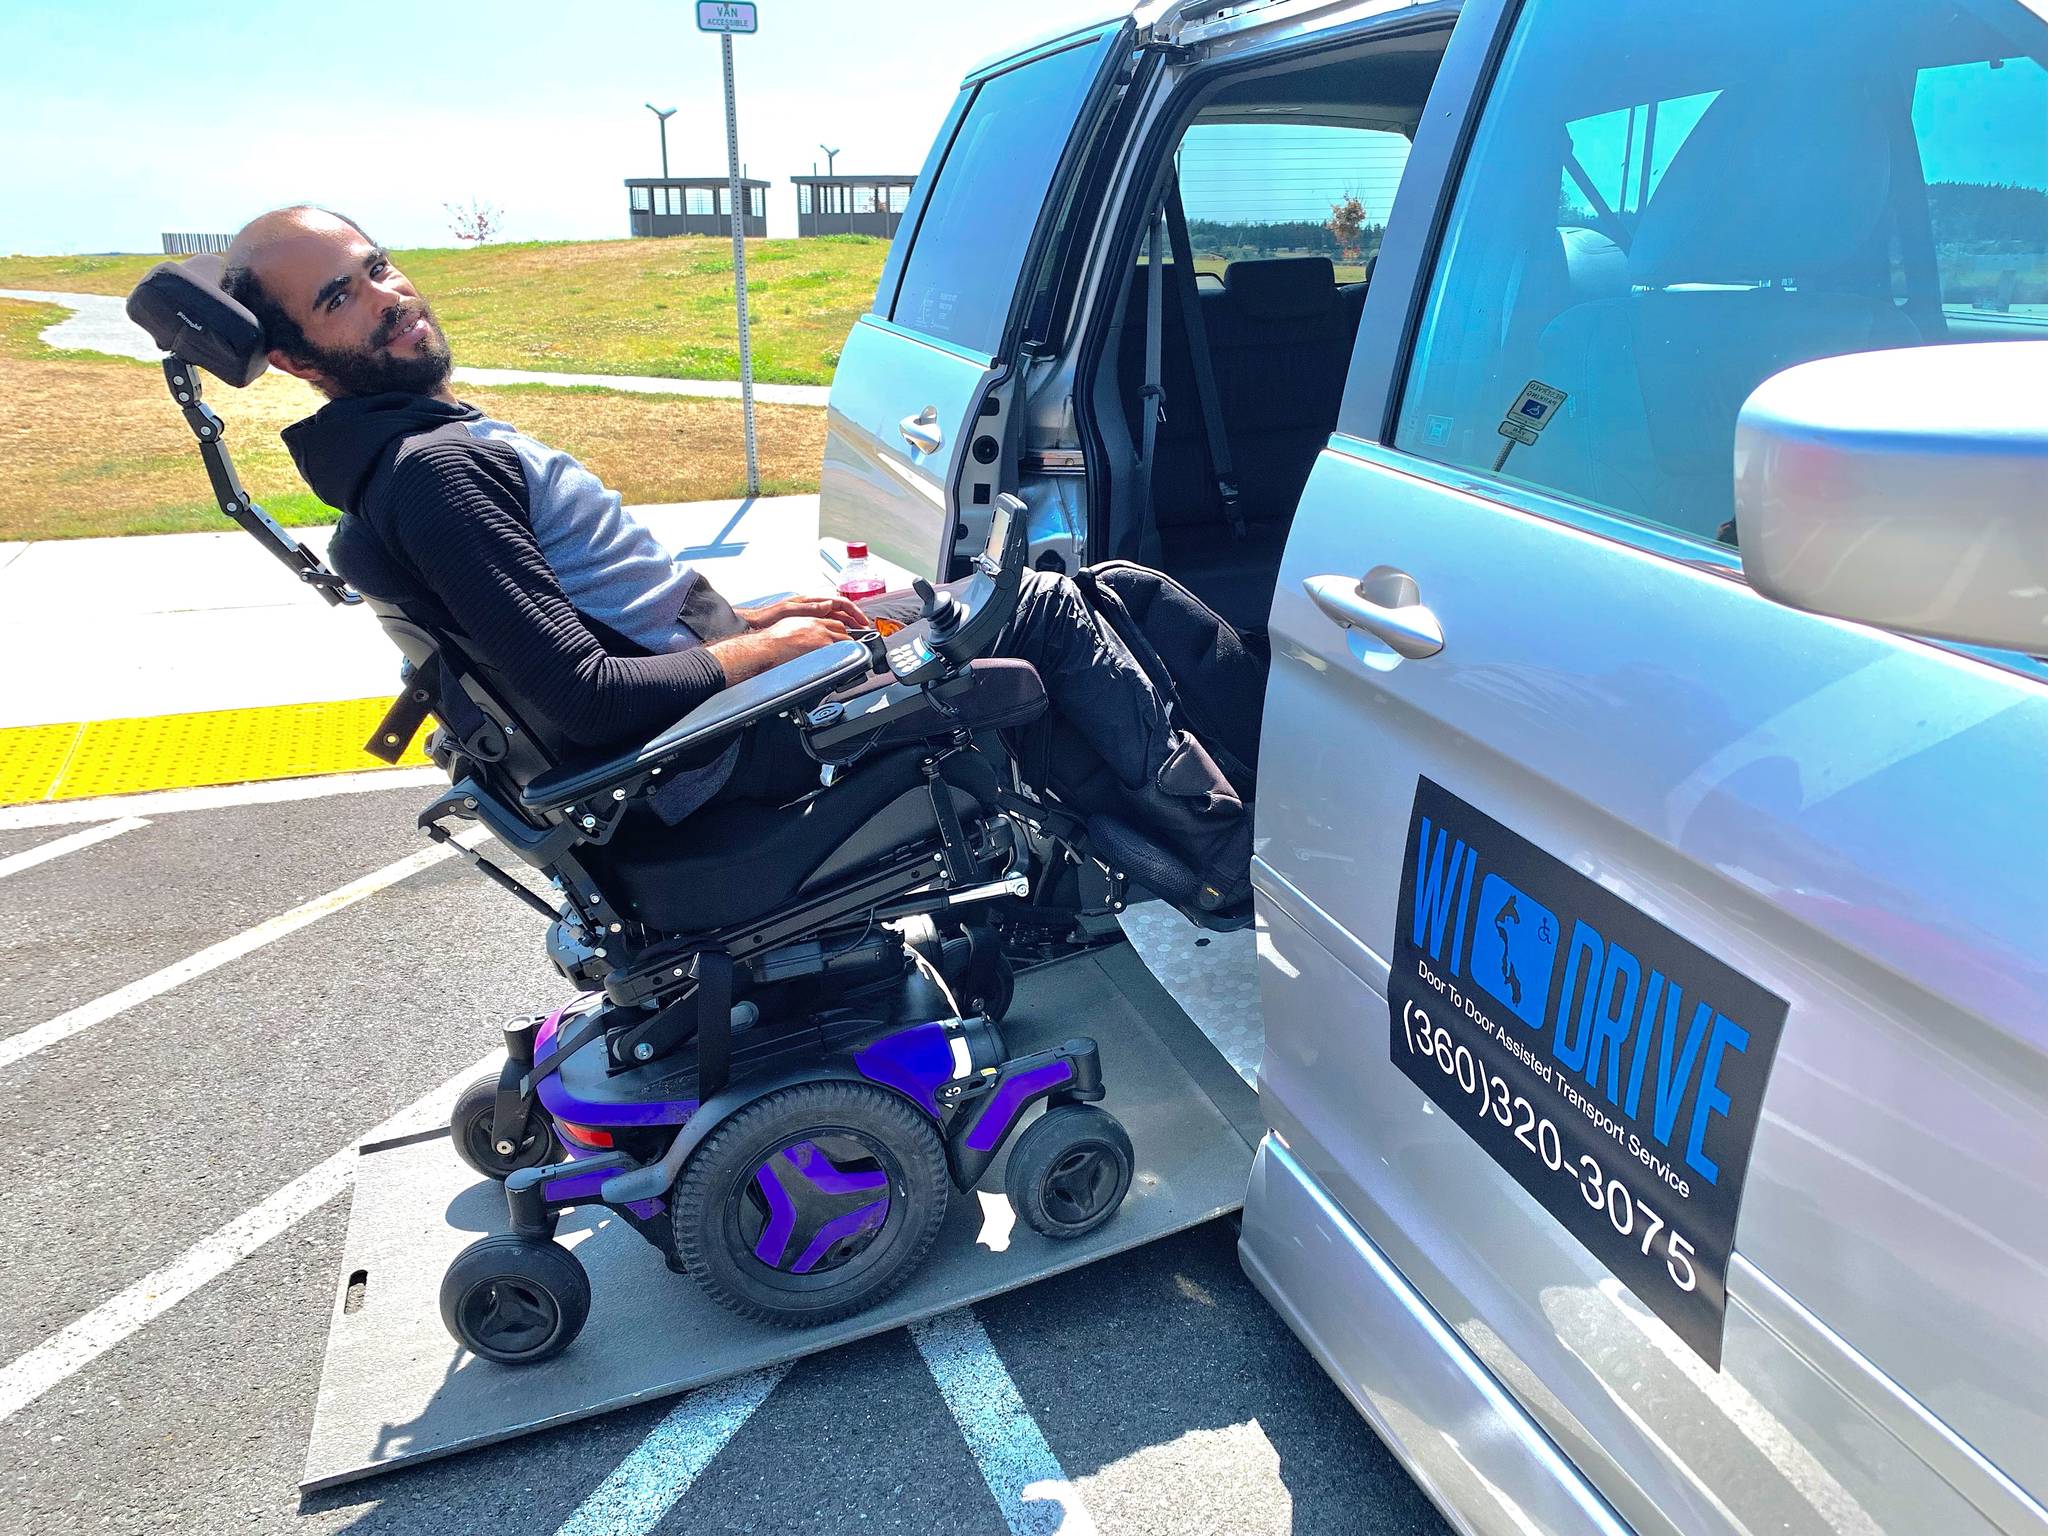 Stuart Peeples demonstrates how to enter Heather Mayhugh’s wheelchair van. In recent months, while navigating the new Mukilteo ferry terminal, Mayhugh has struggled to unload her clients who need access to the restroom. (Photo by Heather Mayhugh)